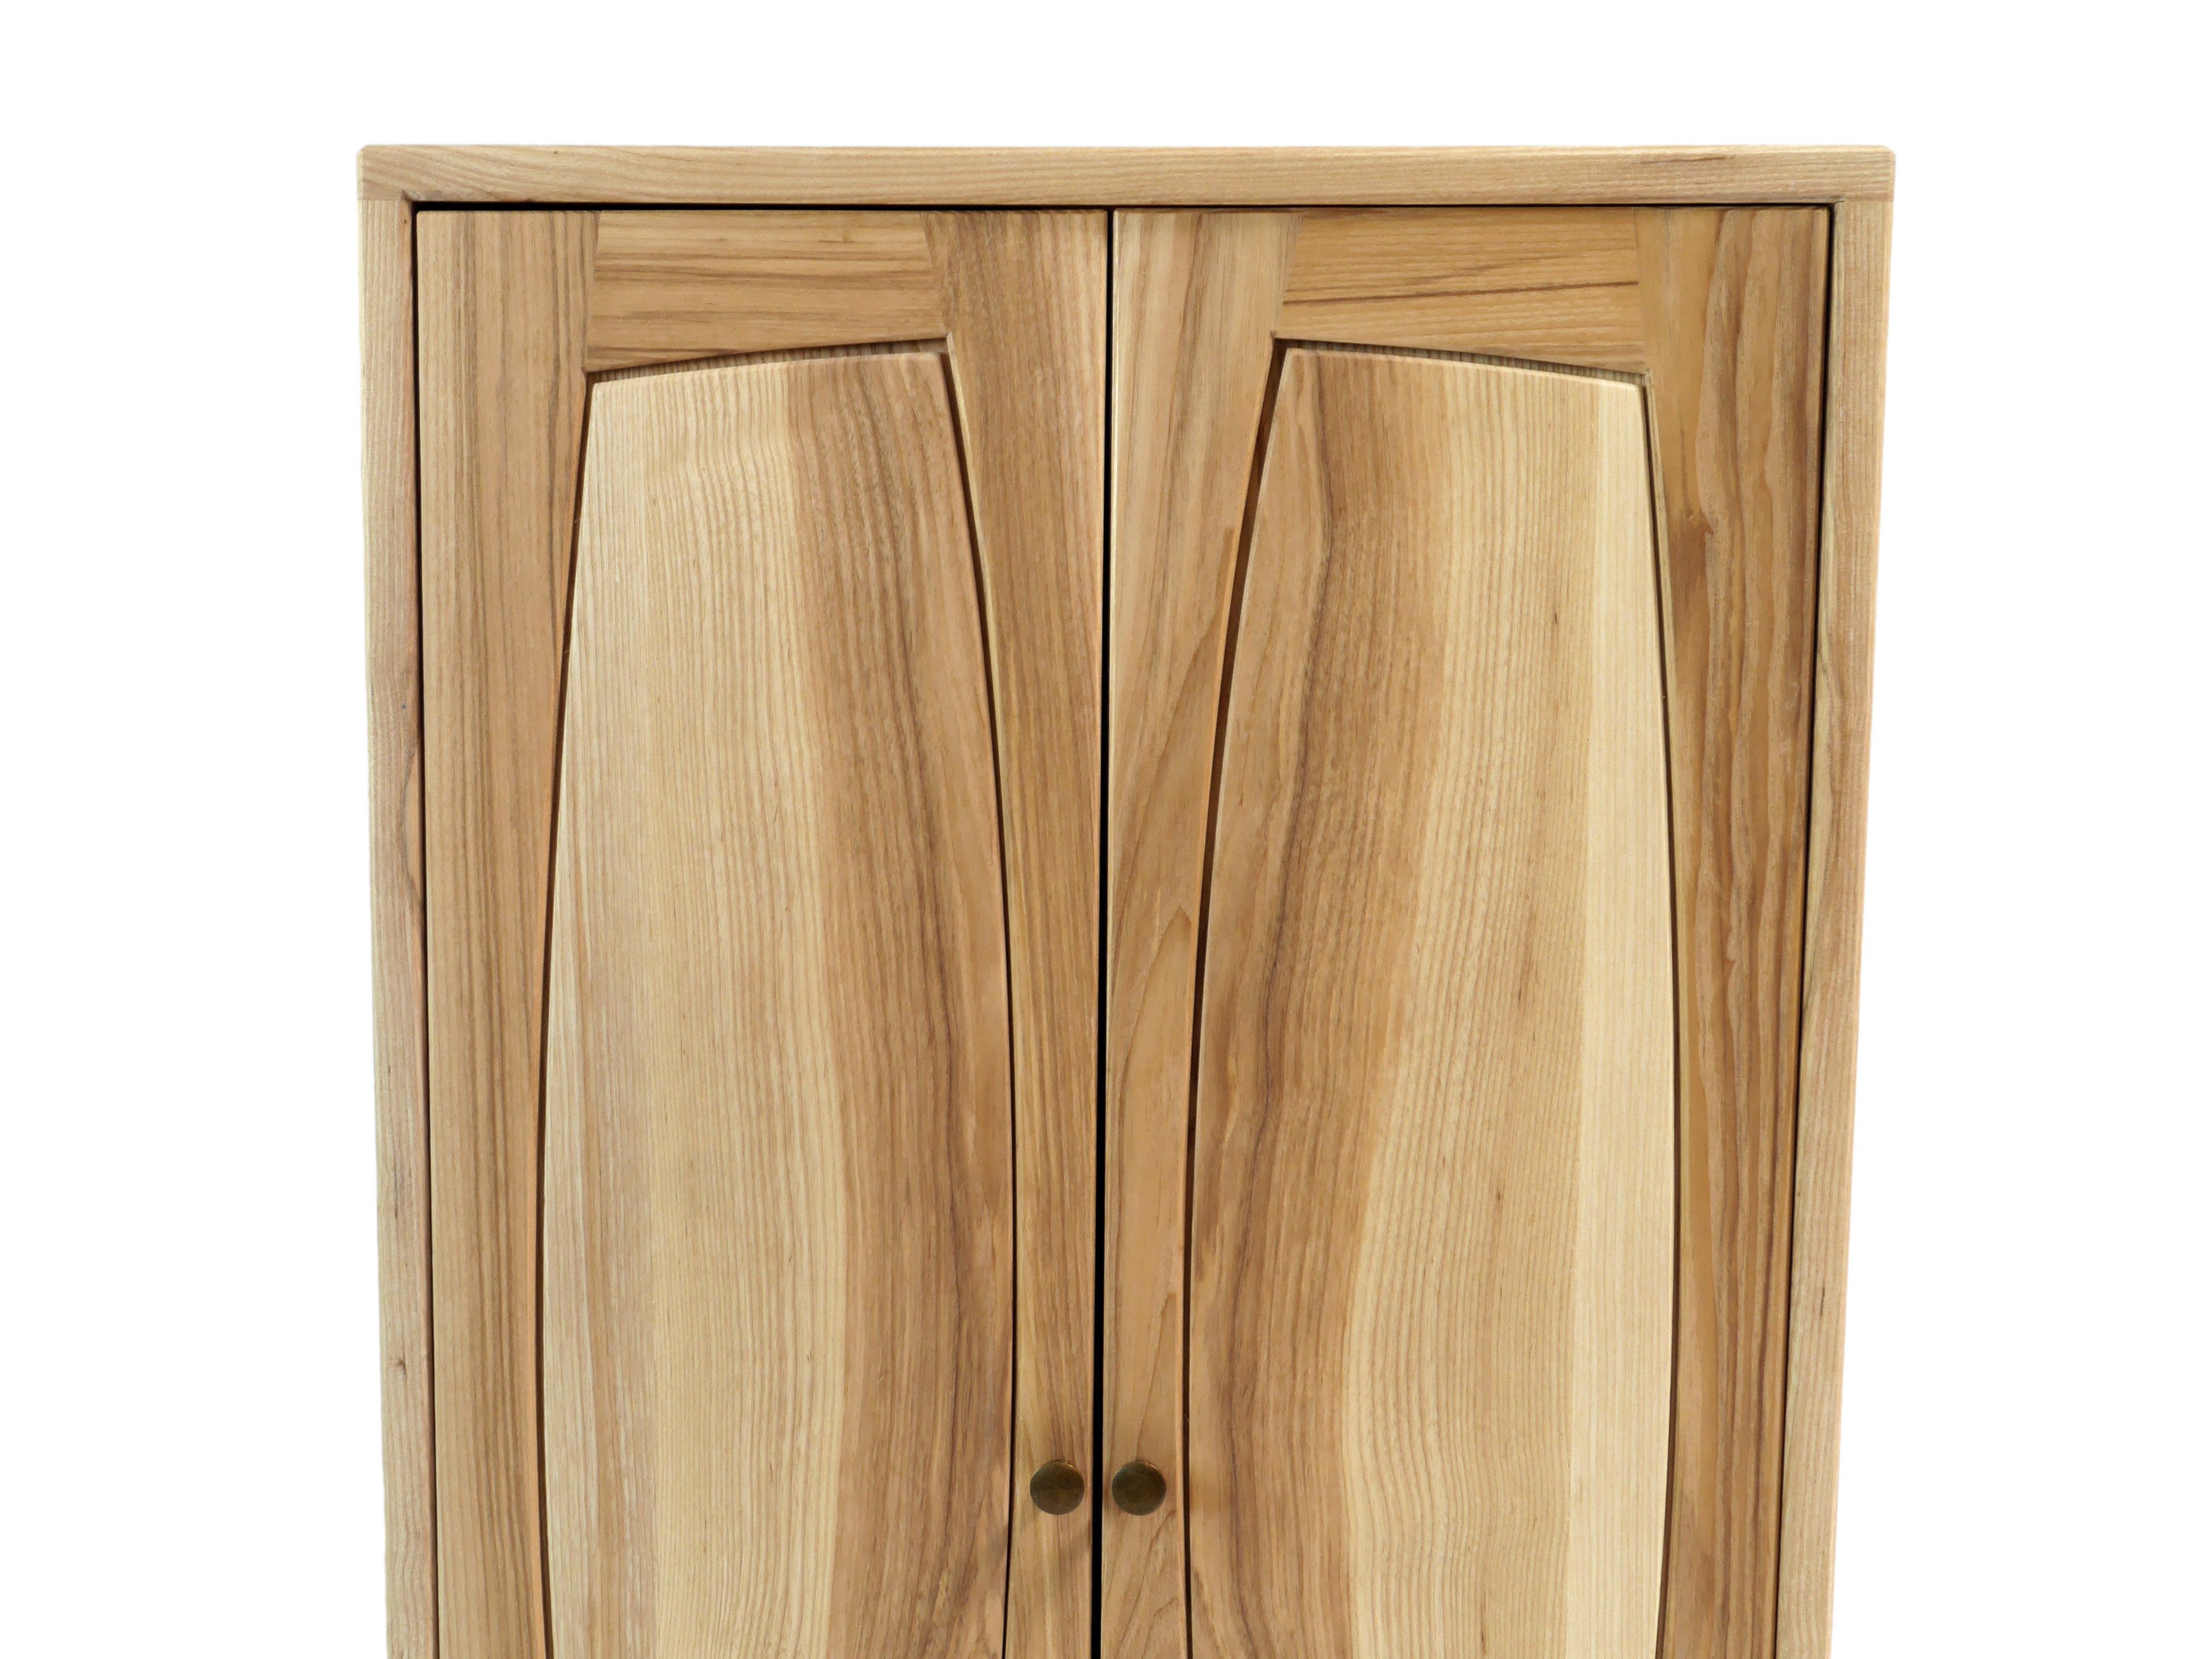 We have one of these in stock, available to ship now.

The stately Vespers Side Cabinet is built of solid ash hardwood with a black walnut stand. Its two doors are made with curved frame and raised panel construction adding playfulness to a